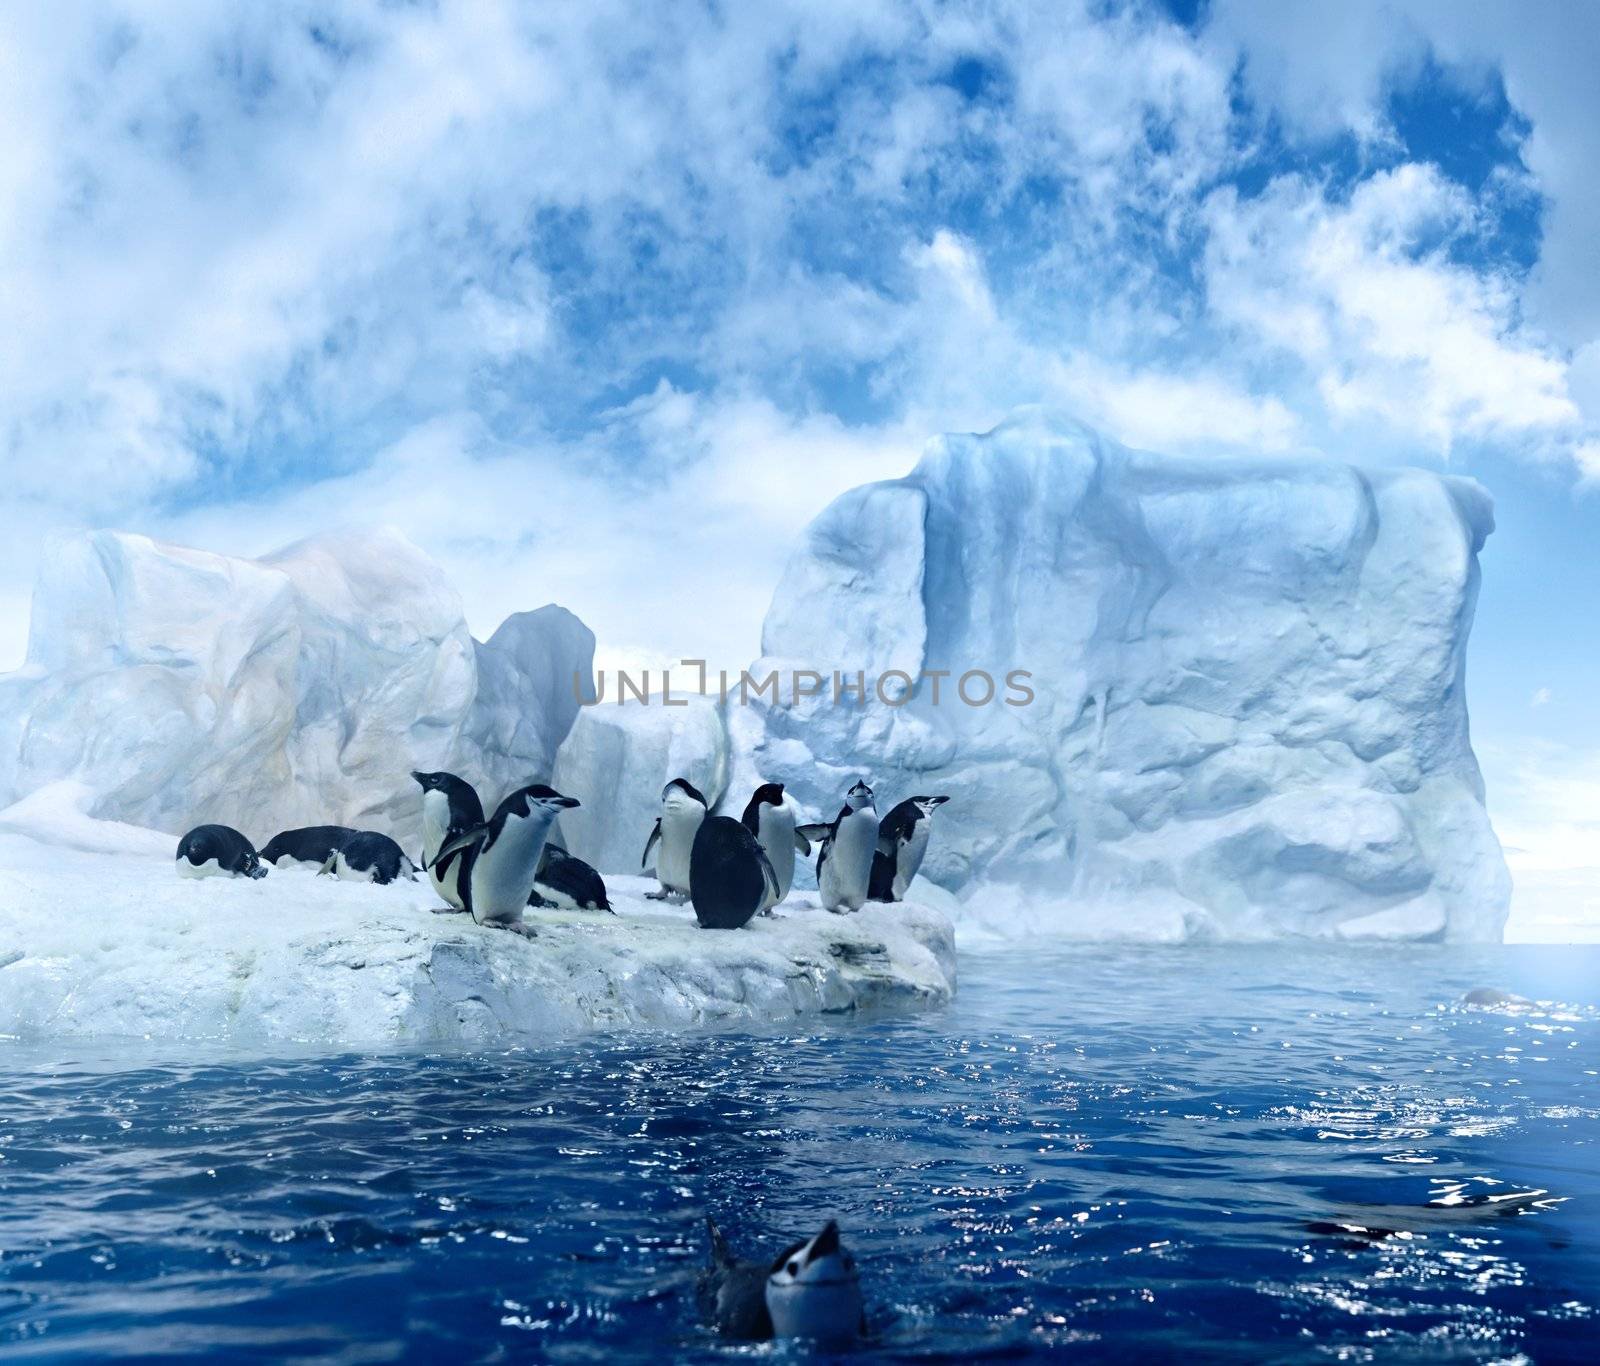 bunch of penguins sitting on melting ice floes in the antarctic region